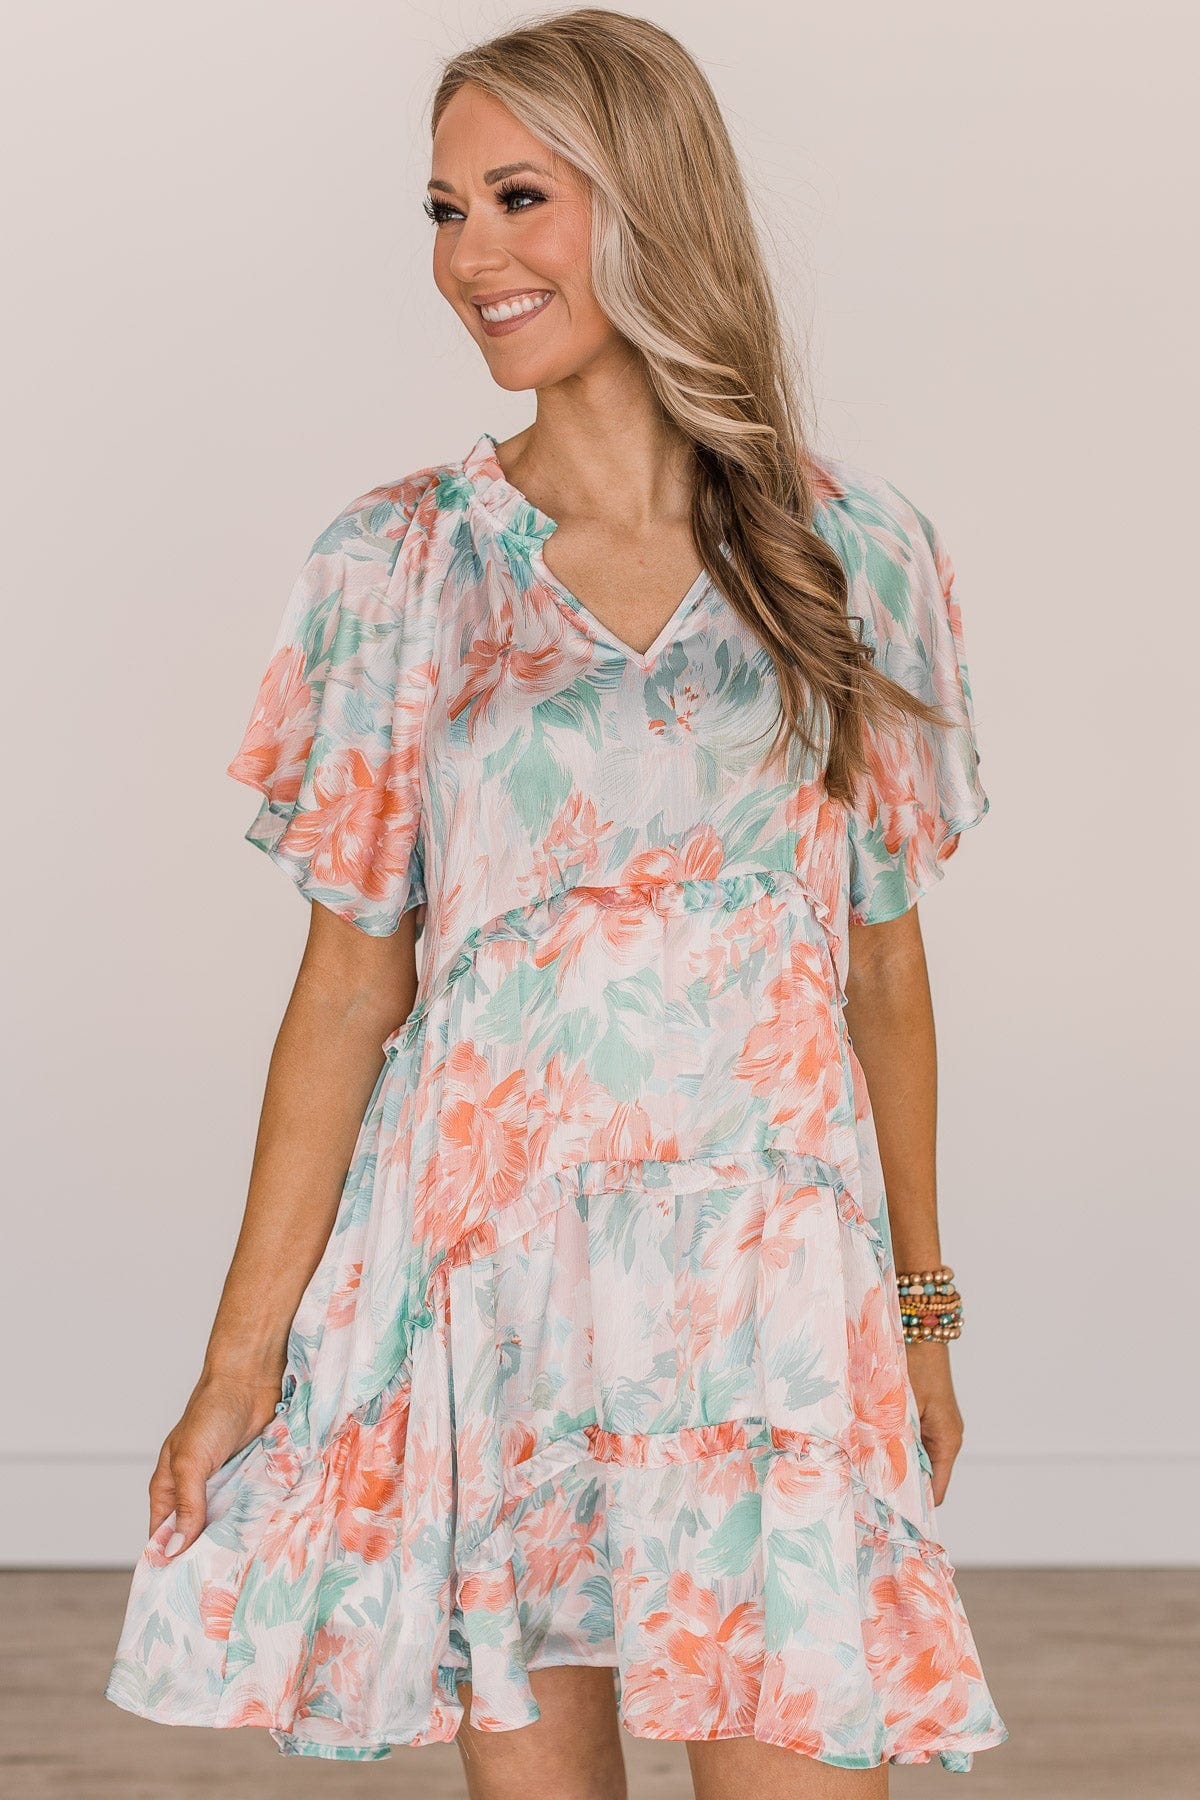 Cherish The Thought Floral Dress- Peach & Turquoise